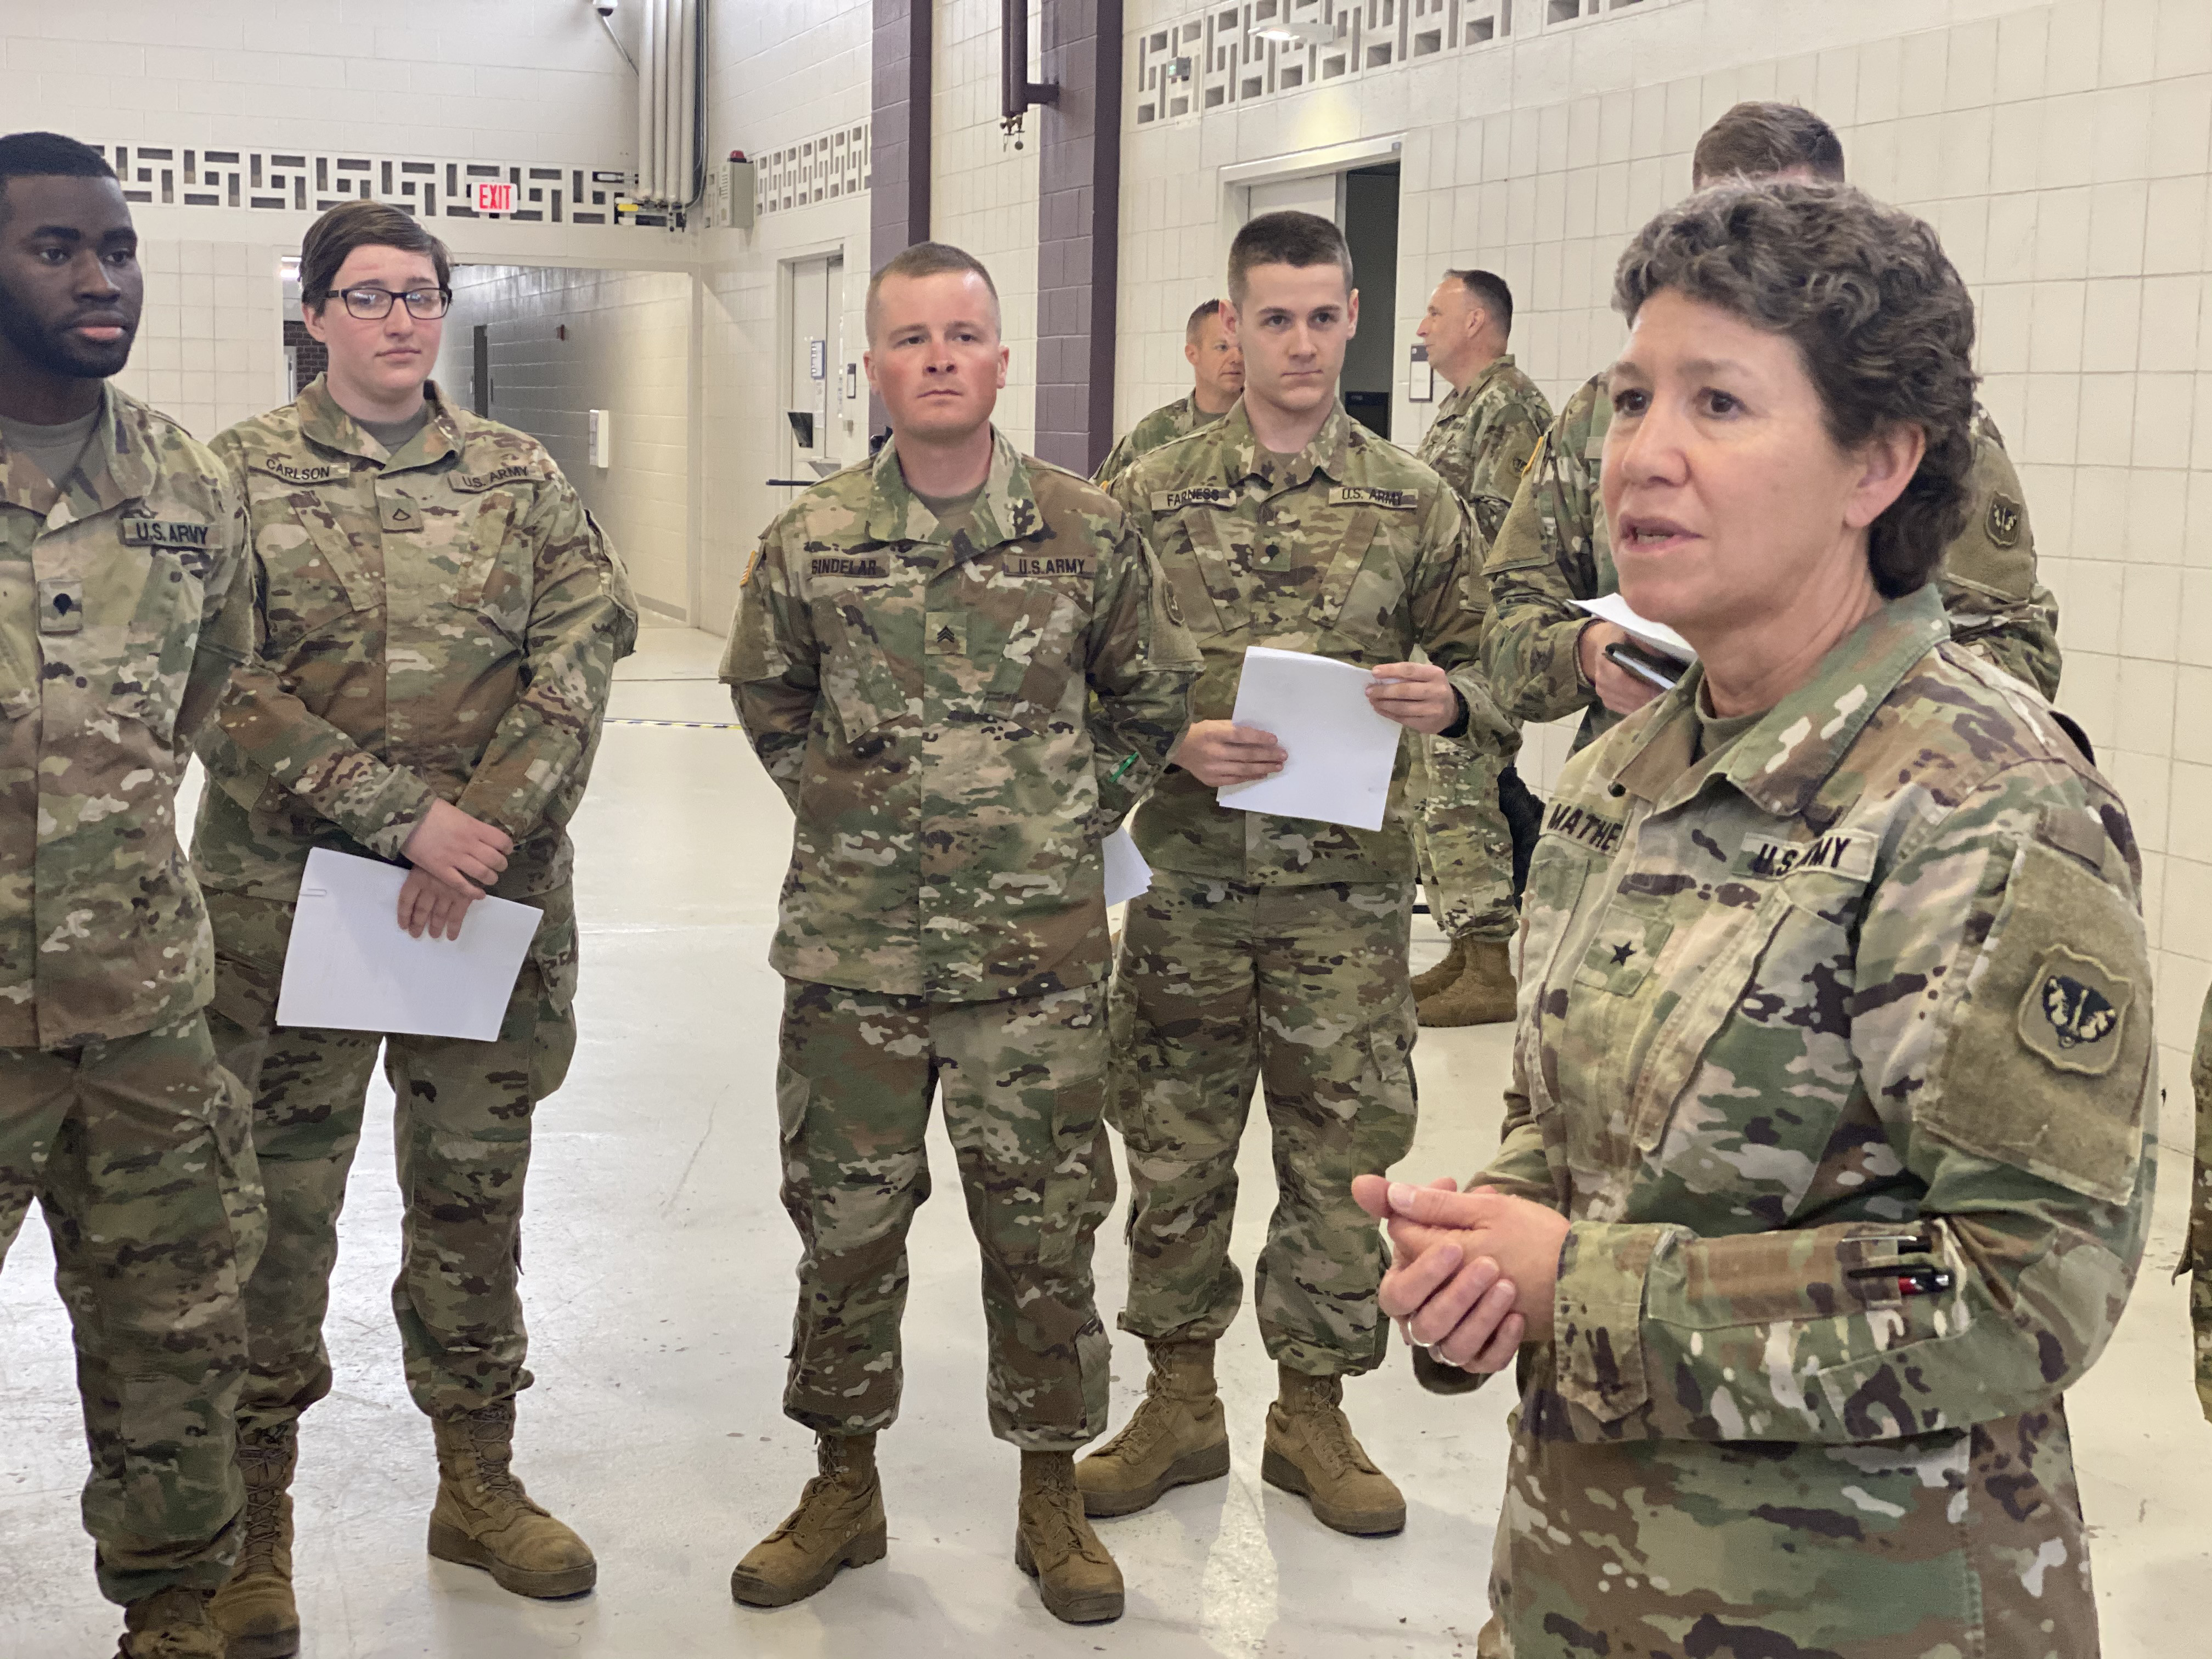 Wisconsin National Guard ready to support state, Article